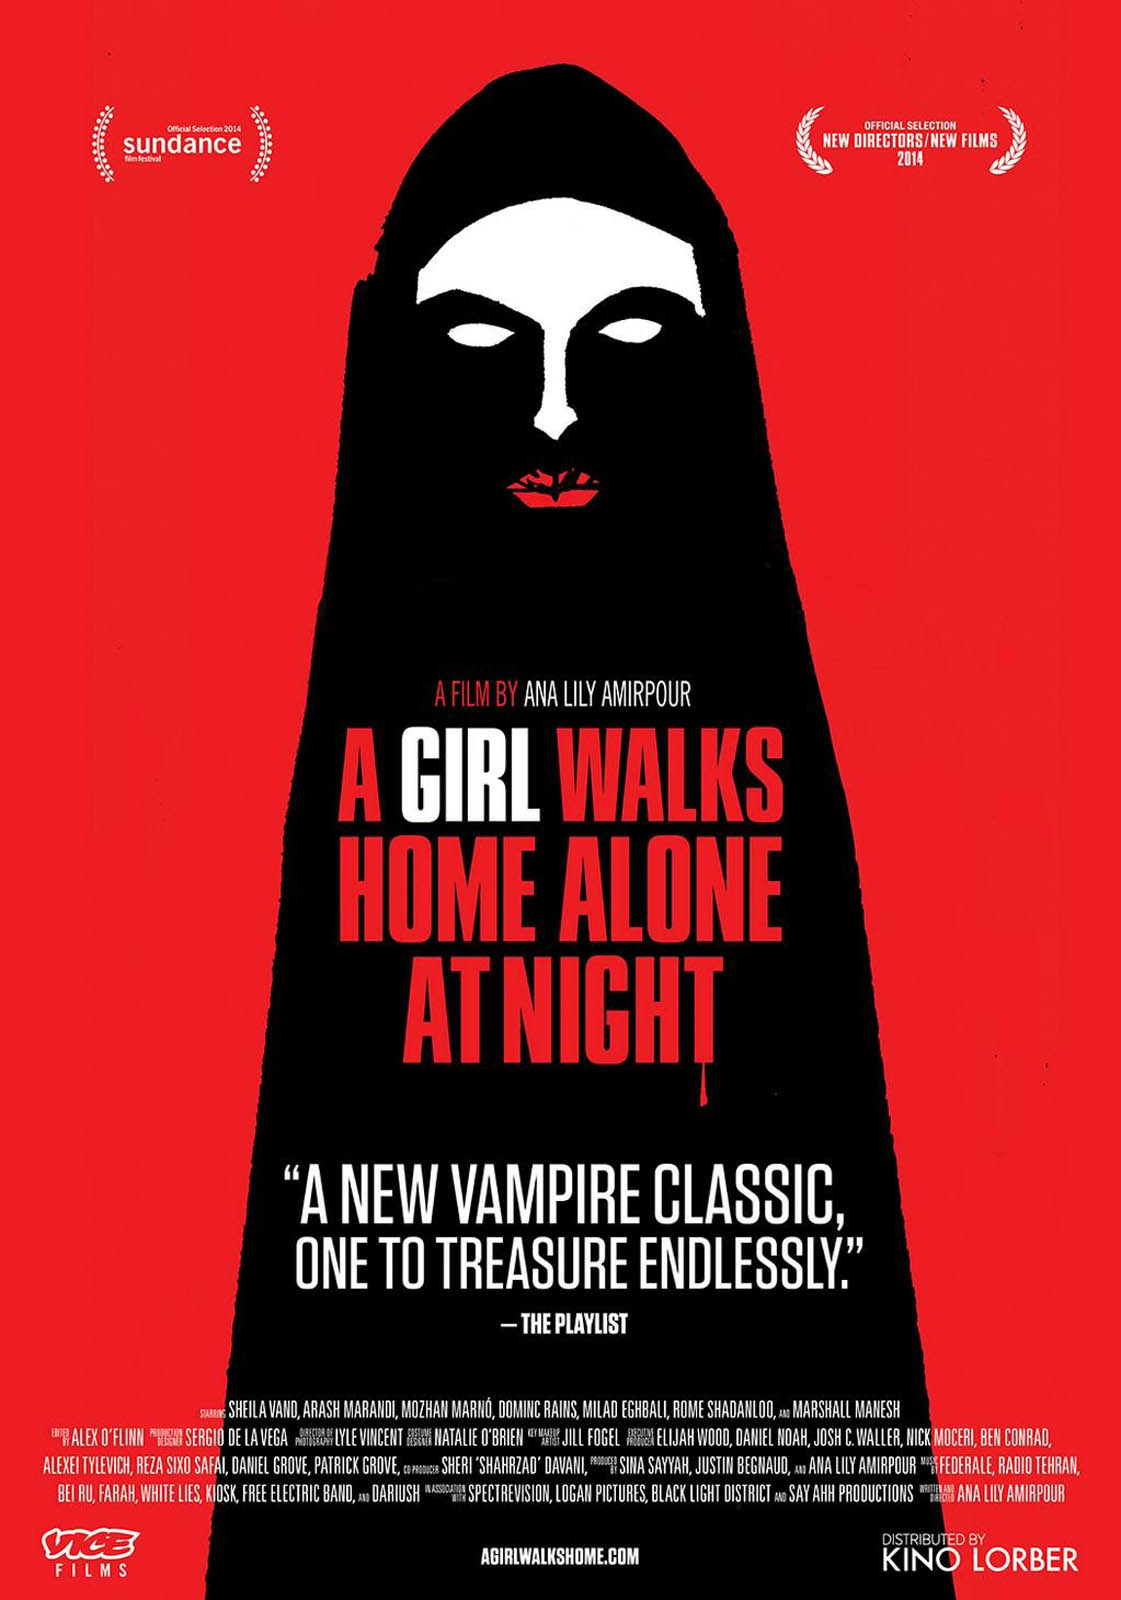 GIRL WALKS HOME ALONE AT NIGHT, A